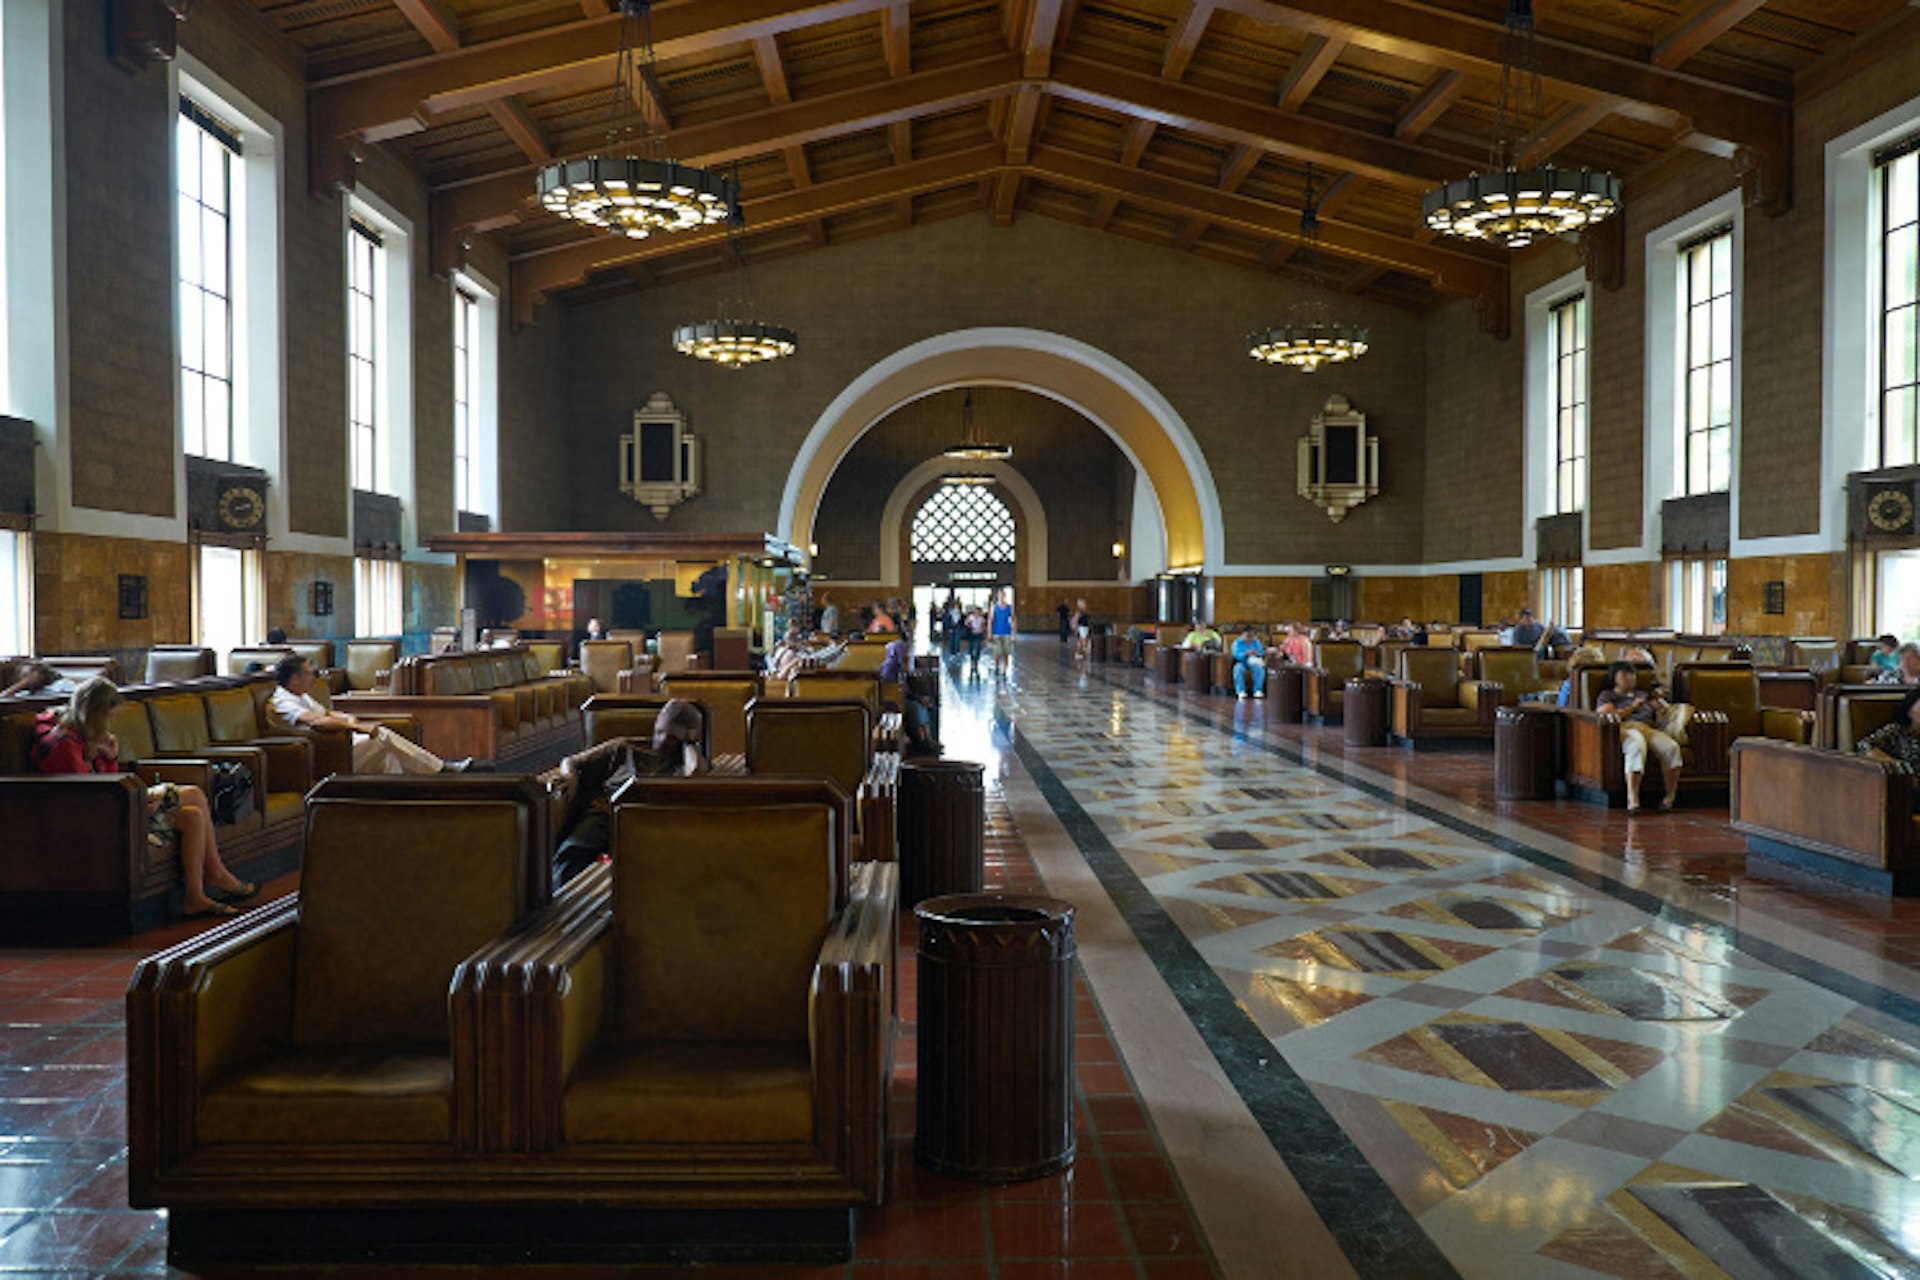 Union Station is an art deco masterpiece, inside and out. Image by Steve Lewis Stock / Photodisc / Getty Images